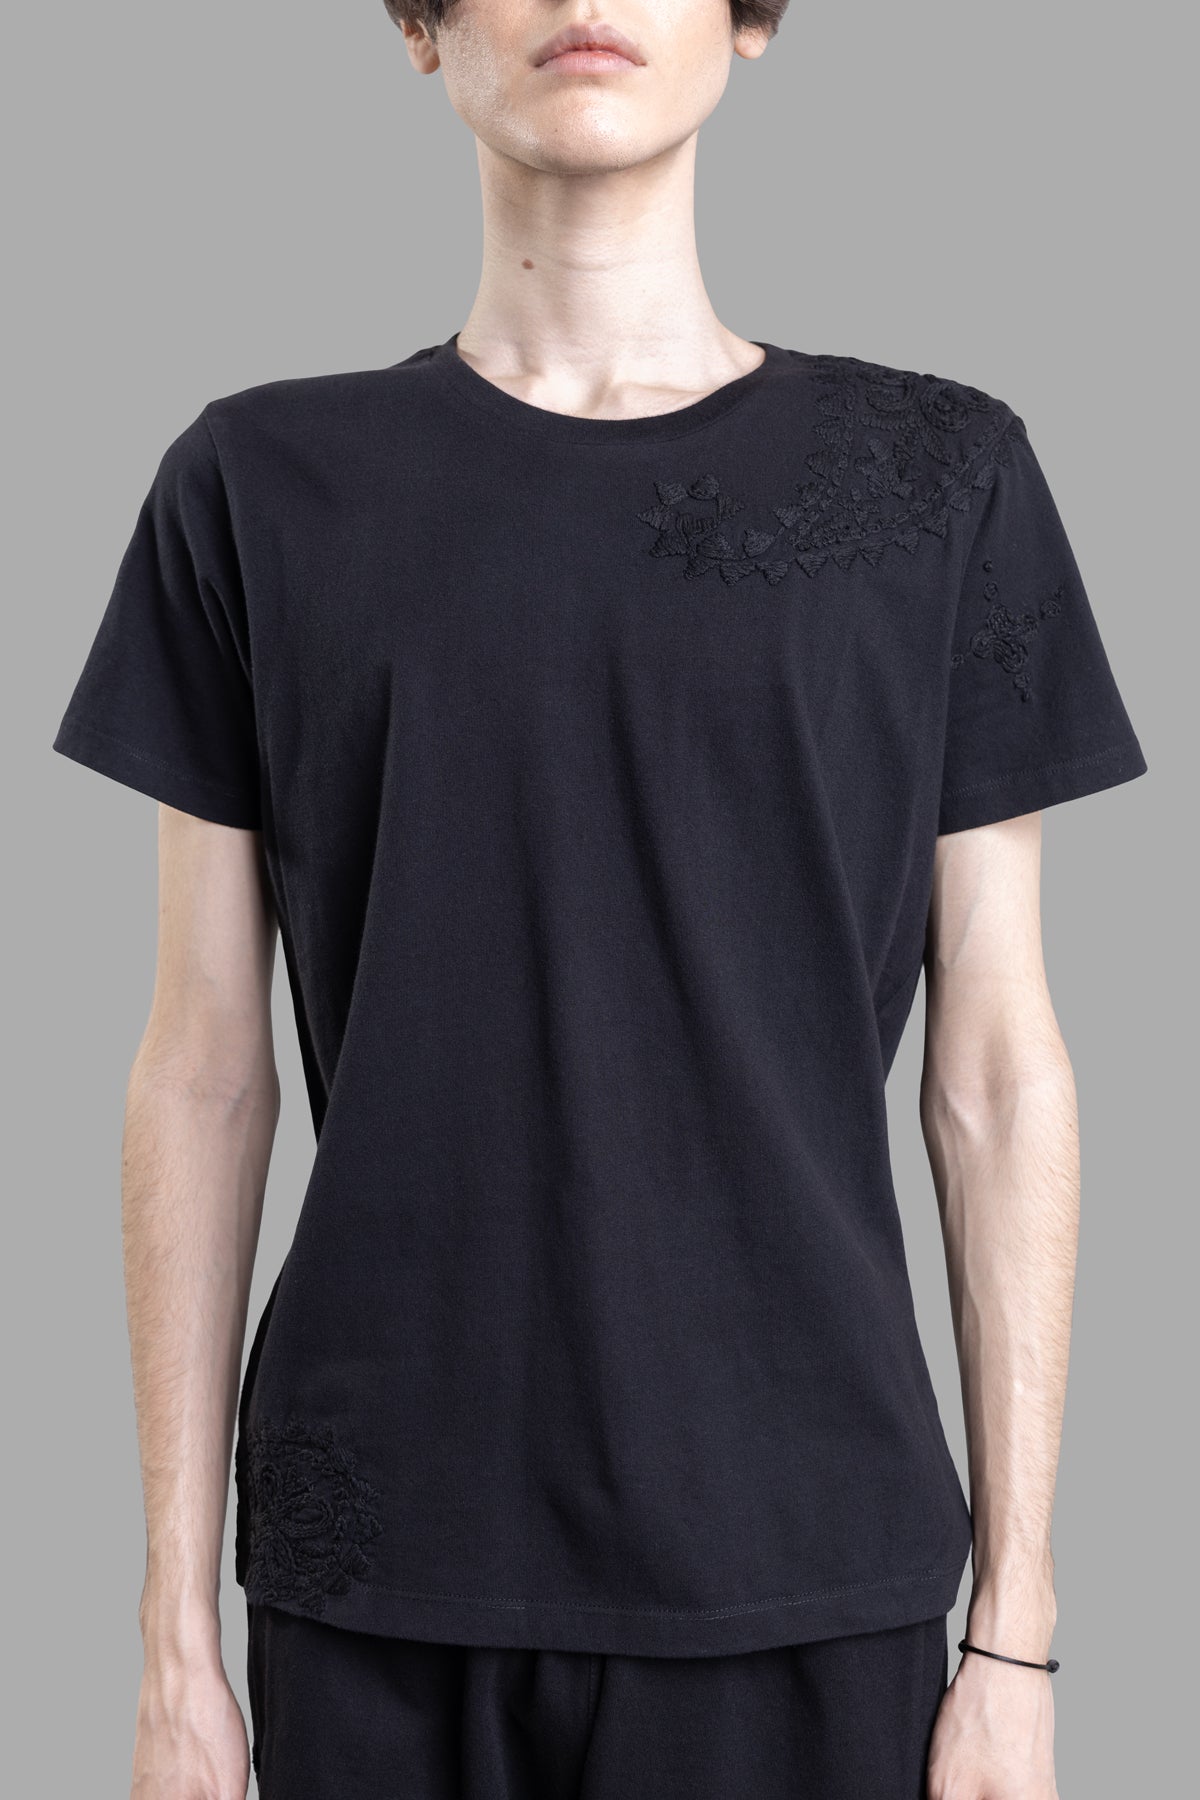 Black Embroidered T-shirt